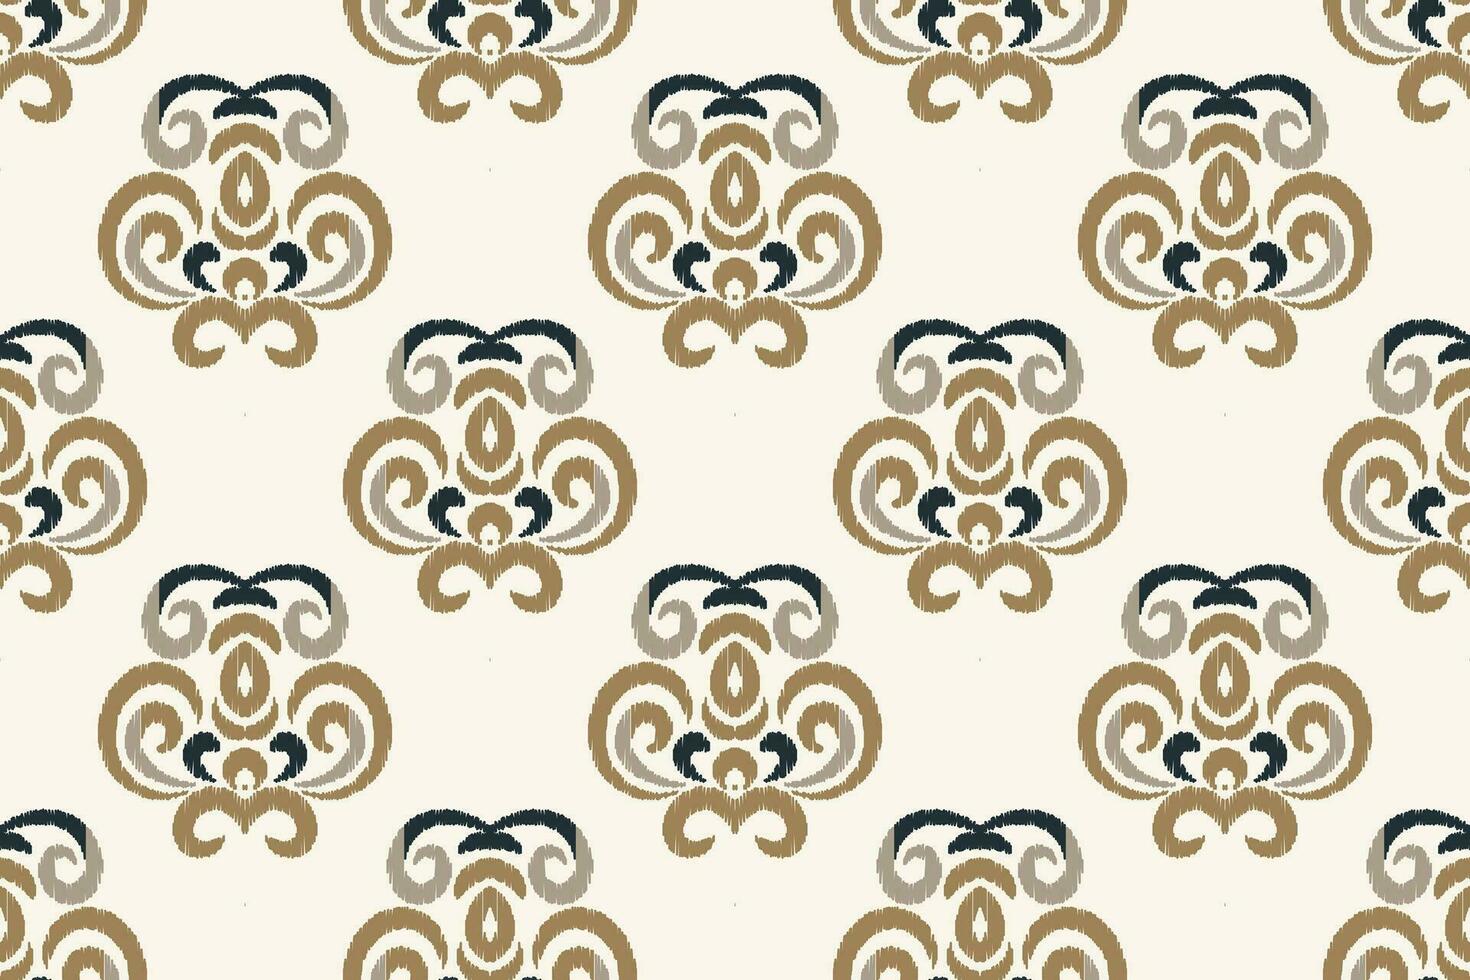 Ikat Floral Paisley Embroidery Background. Ikat Pattern Geometric Ethnic Oriental Pattern Traditional. Ikat Aztec Style Abstract Design for Print Texture,fabric,saree,sari,carpet. vector